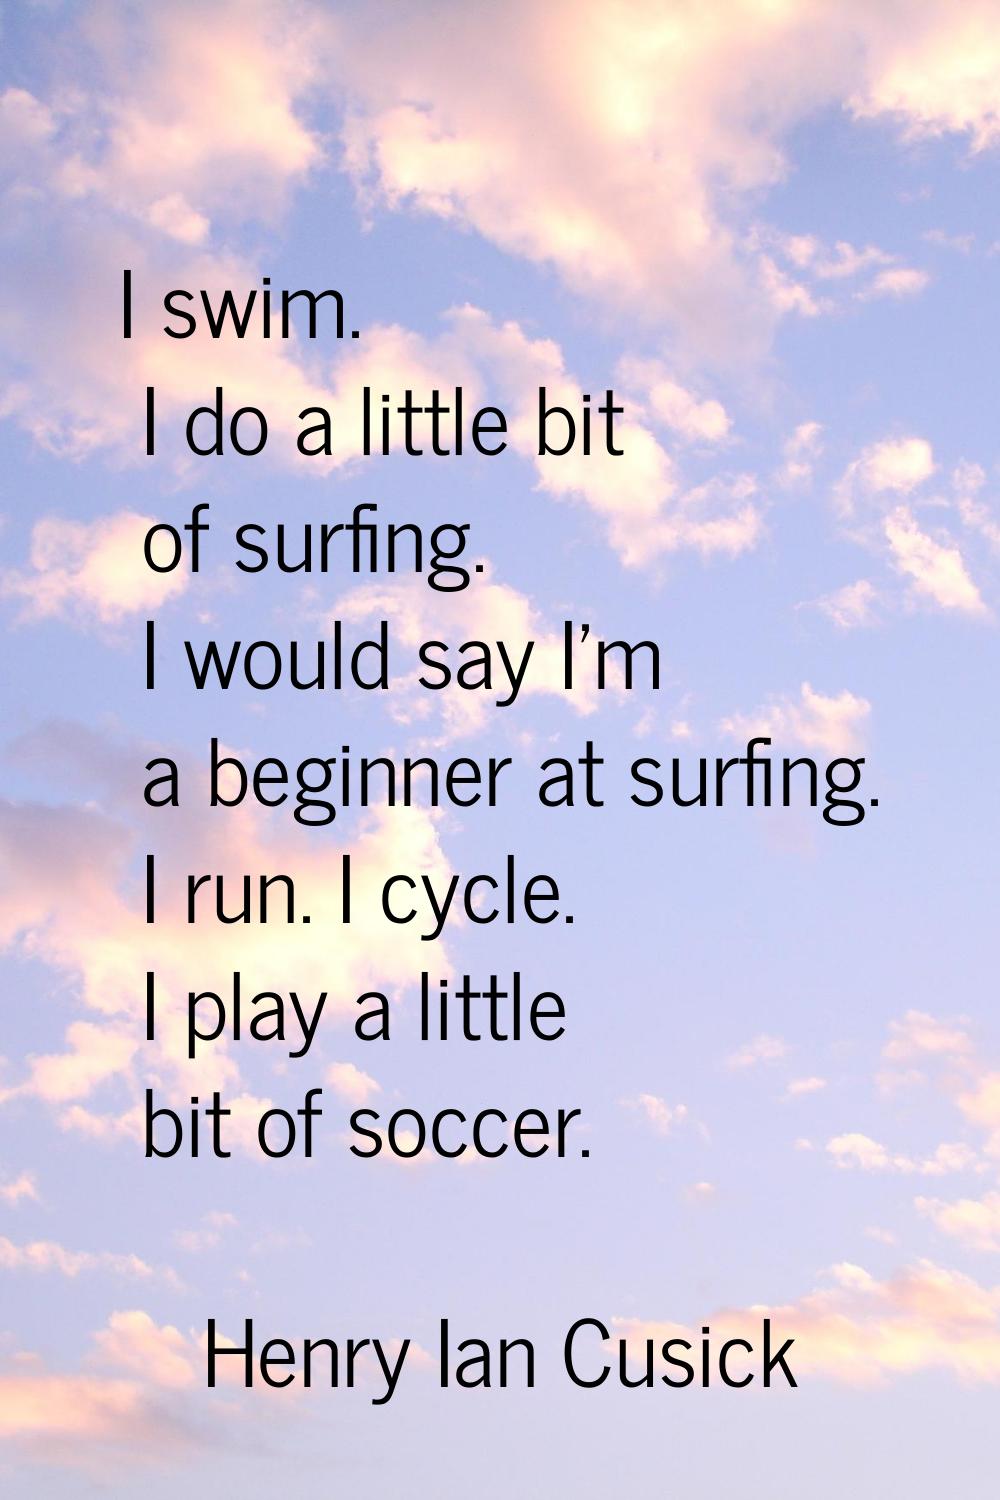 I swim. I do a little bit of surfing. I would say I'm a beginner at surfing. I run. I cycle. I play